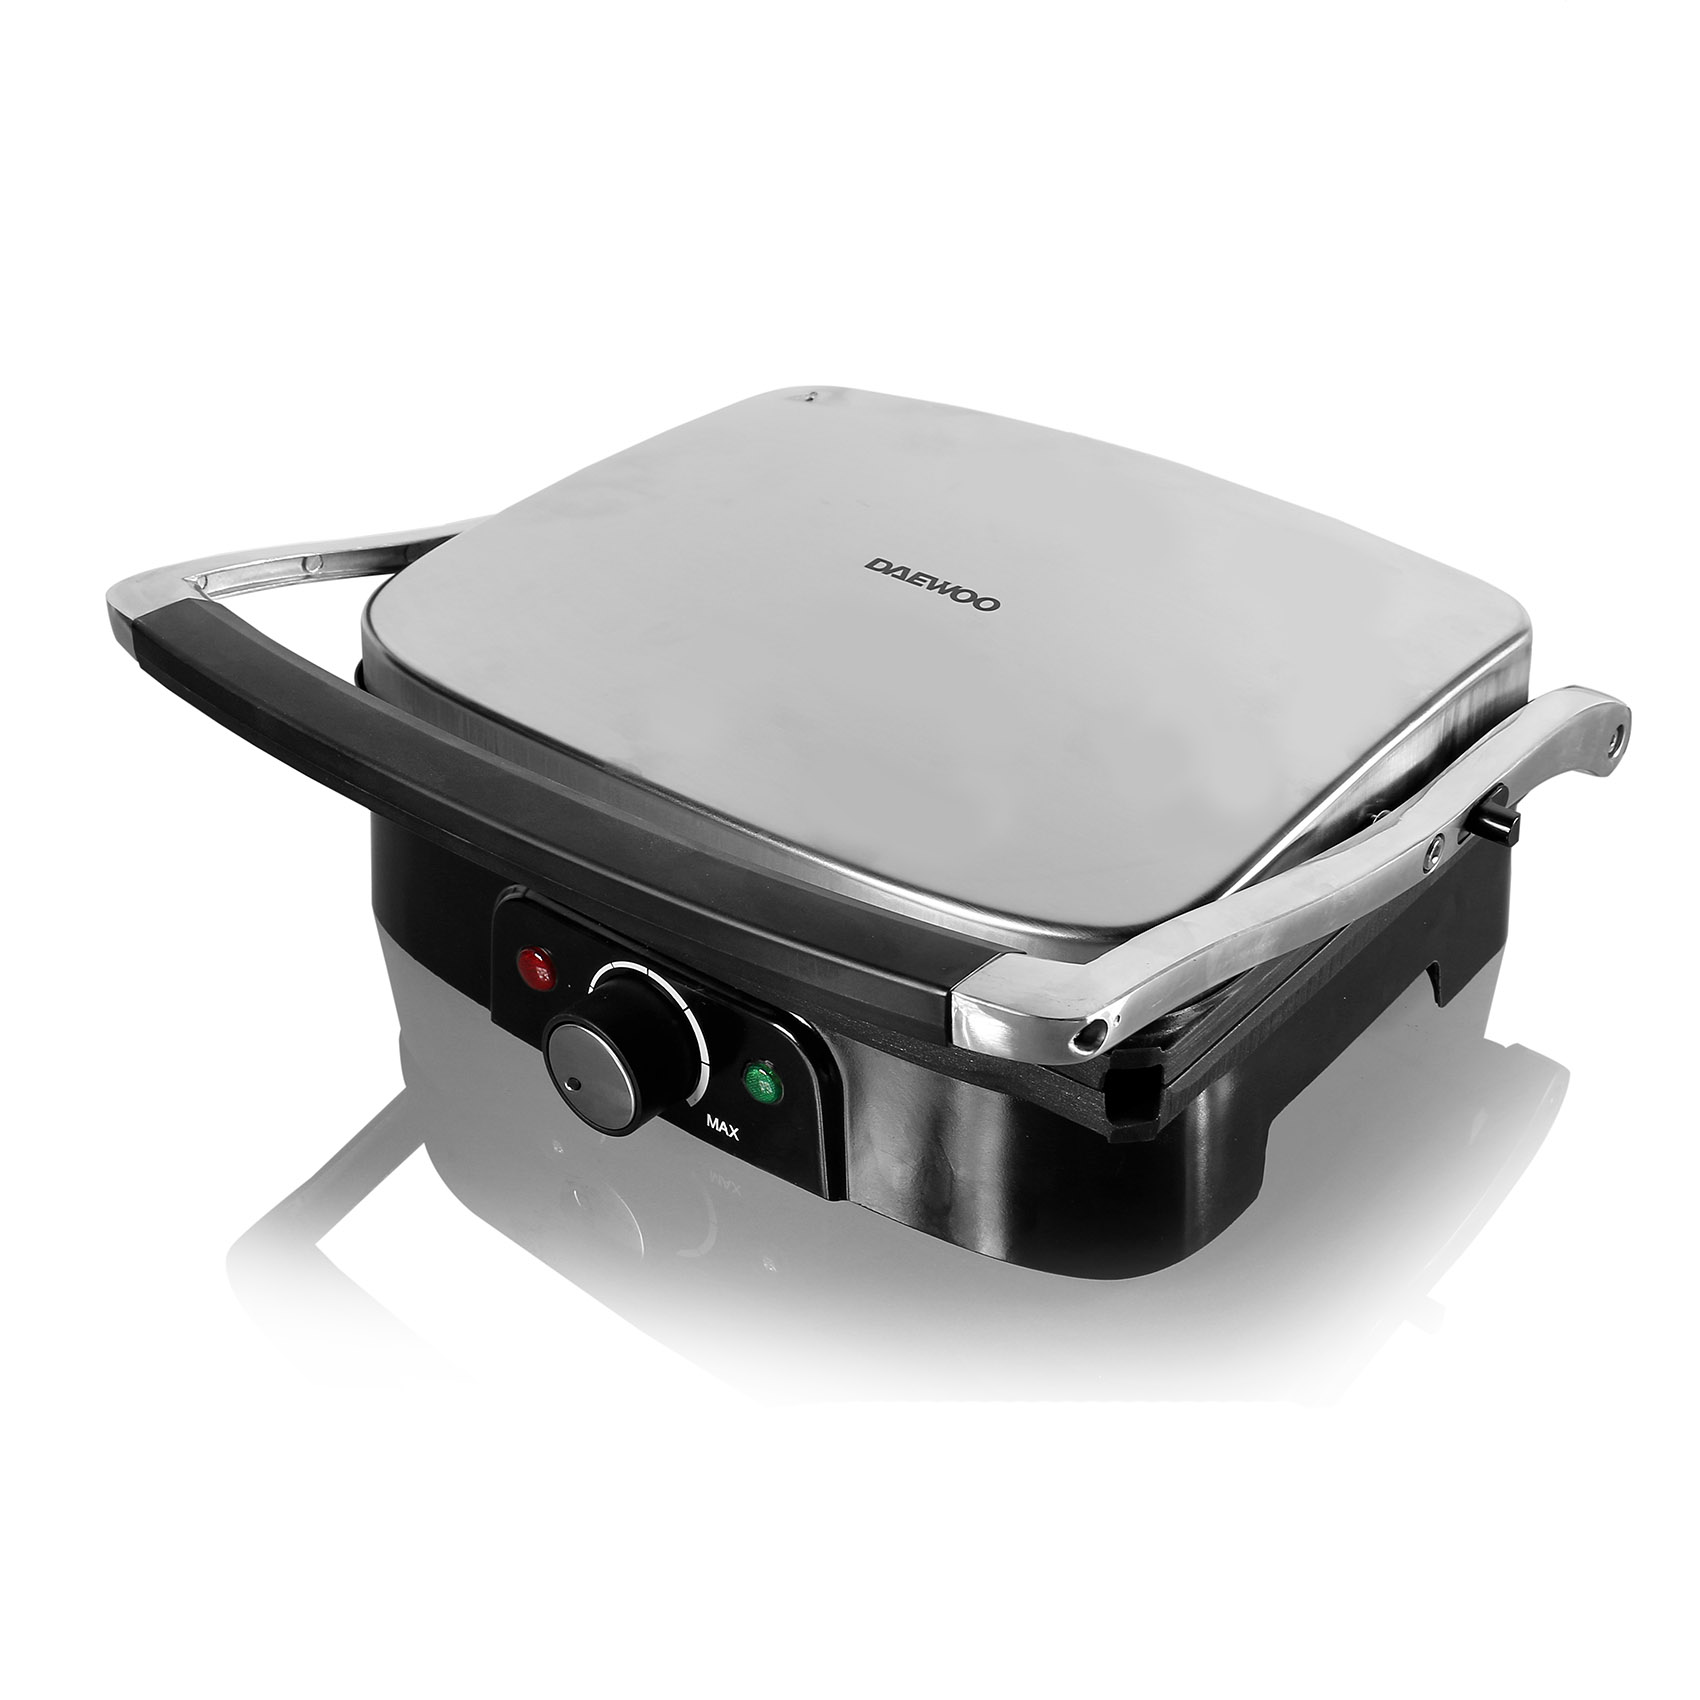 ELECTRIC COMBI GRILL / SANDWICH MAKER / VEG AND MEAT GRILL 1500W DI-9471